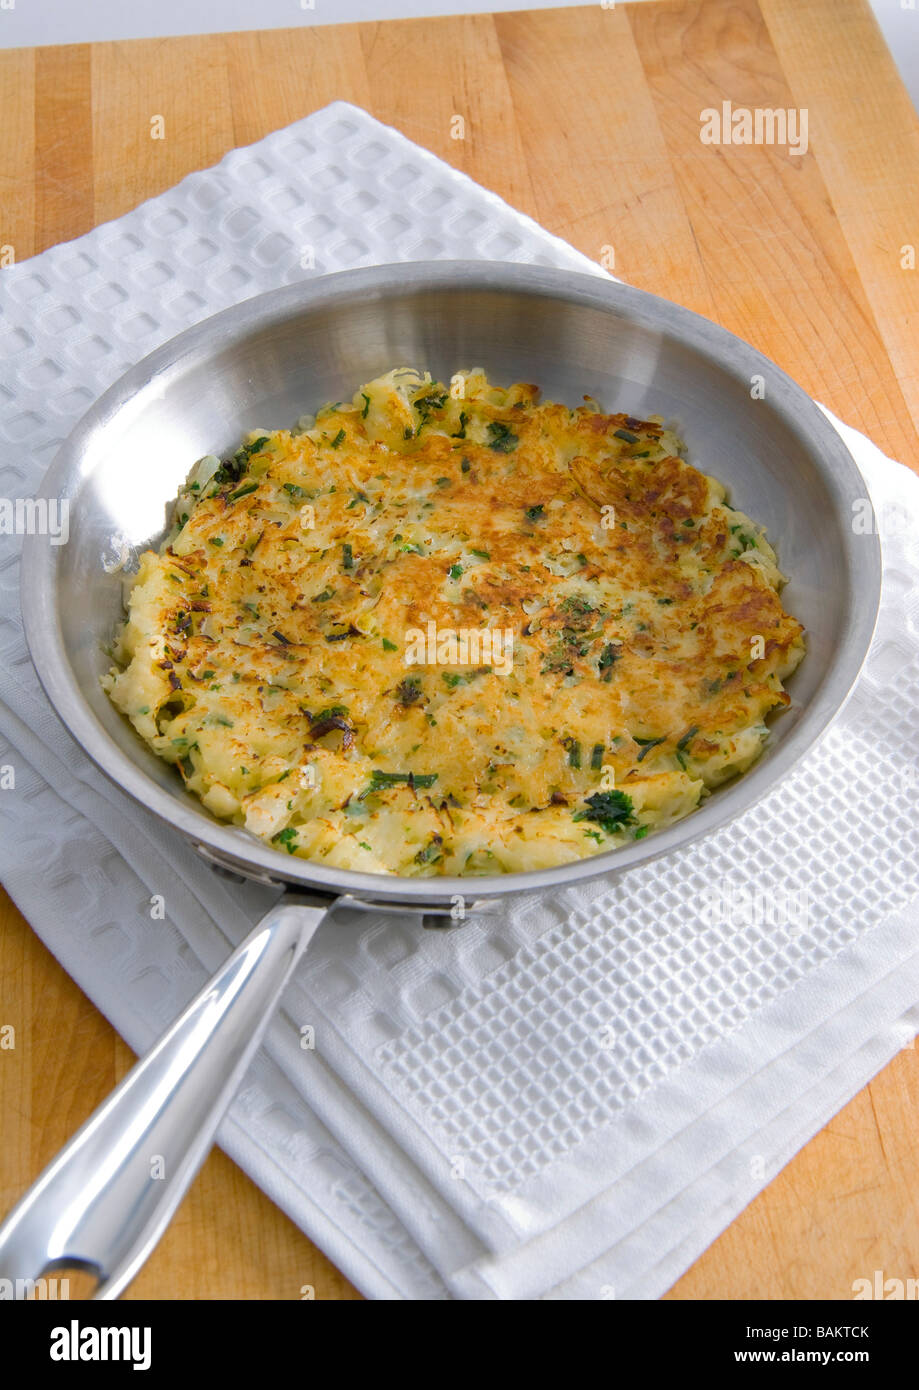 potato and herb galette Stock Photo